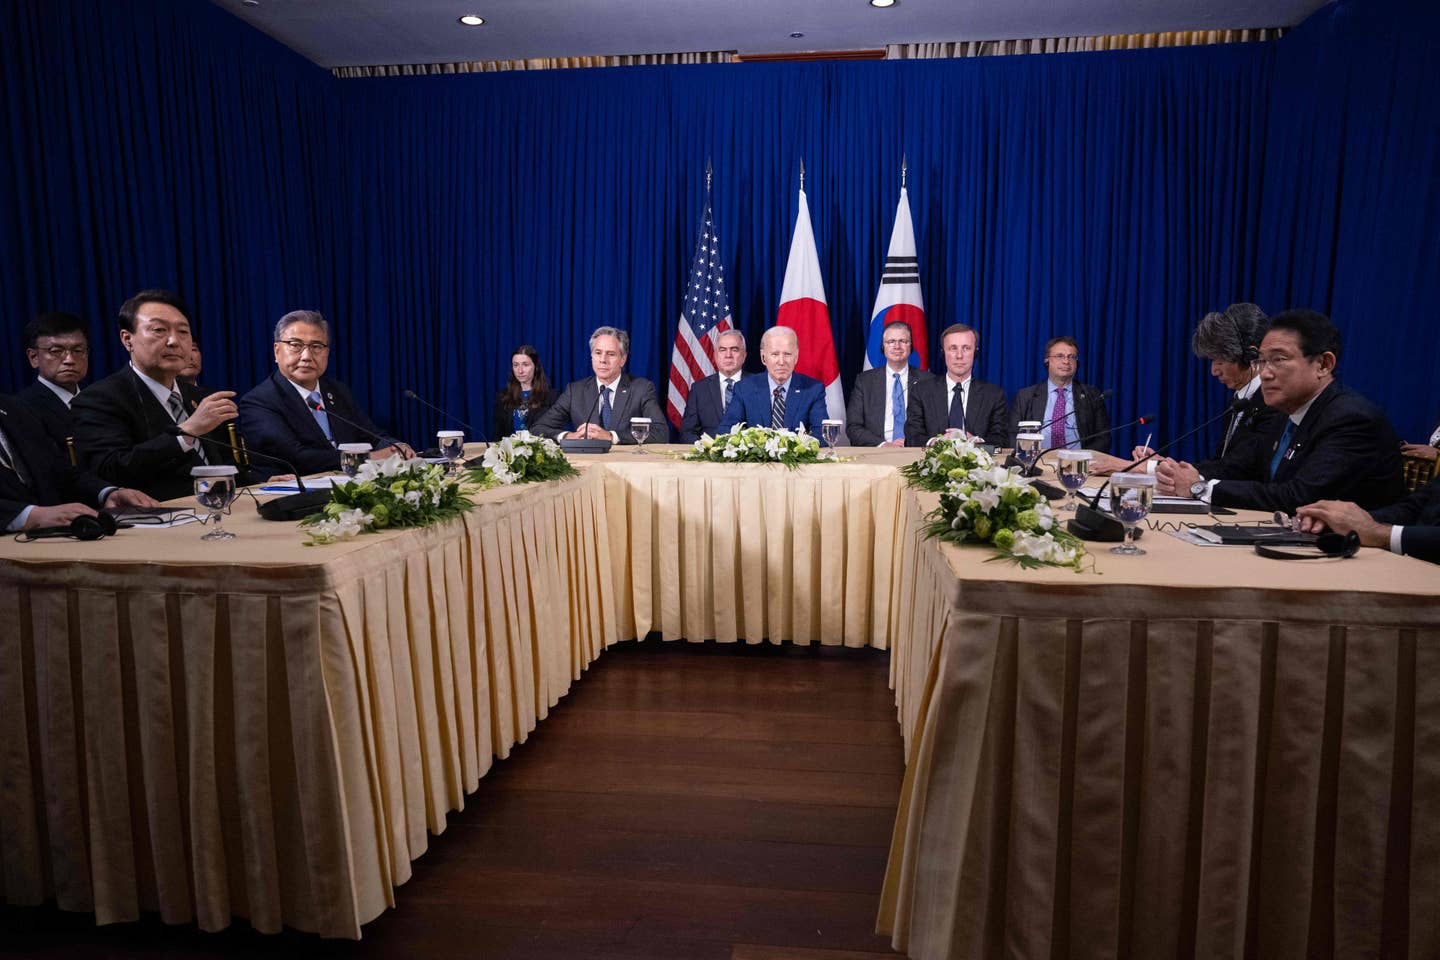 U.S. President Joe Biden (center) meets with Japanese Prime Minister Fumio Kishida (right) and South Korean President Yoon Suk Yeol (left) on the sidelines of the East Asia Summit during the 40th and 41st Association of Southeast Asian Nations (ASEAN) Summits in Phnom Penh on November 13, 2022. <em>Photo by SAUL LOEB/AFP via Getty Images</em>